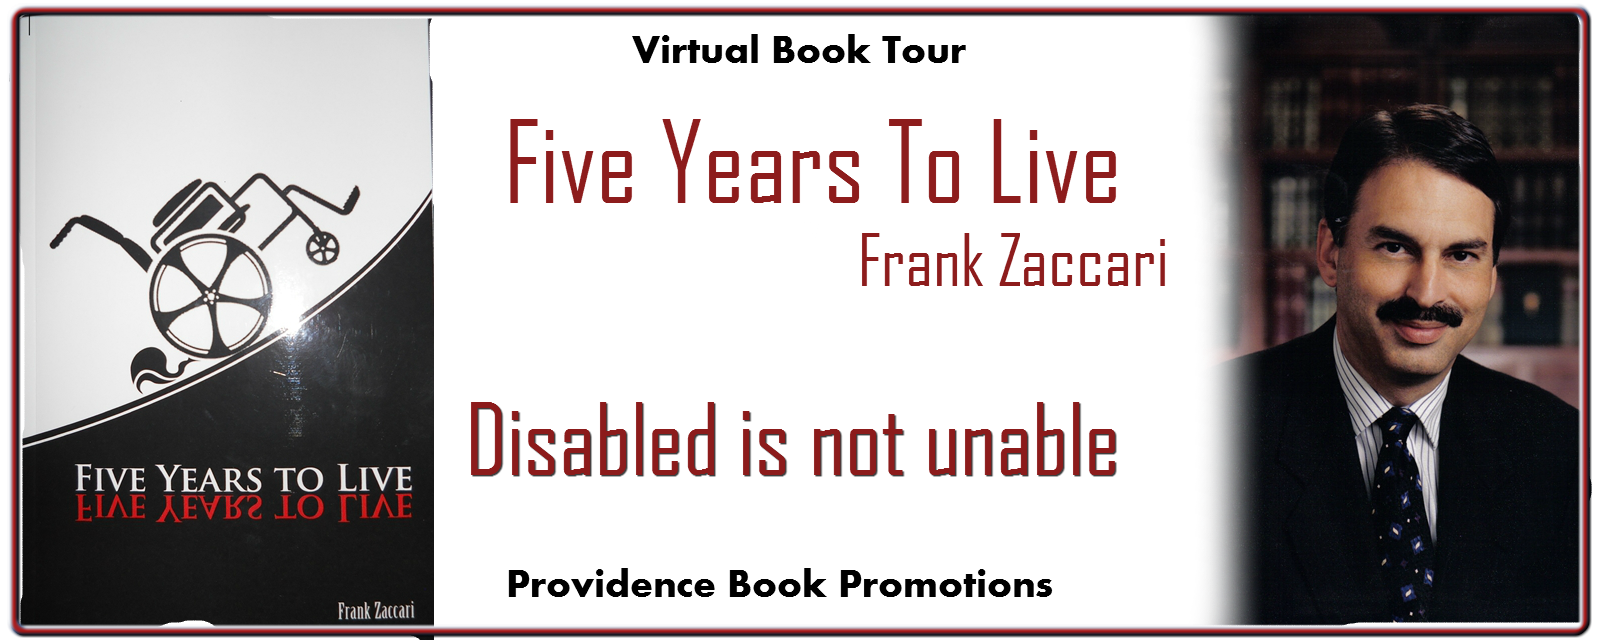 Five Years to Live by Frank Zaccari on Tour December 2012 – February 2013